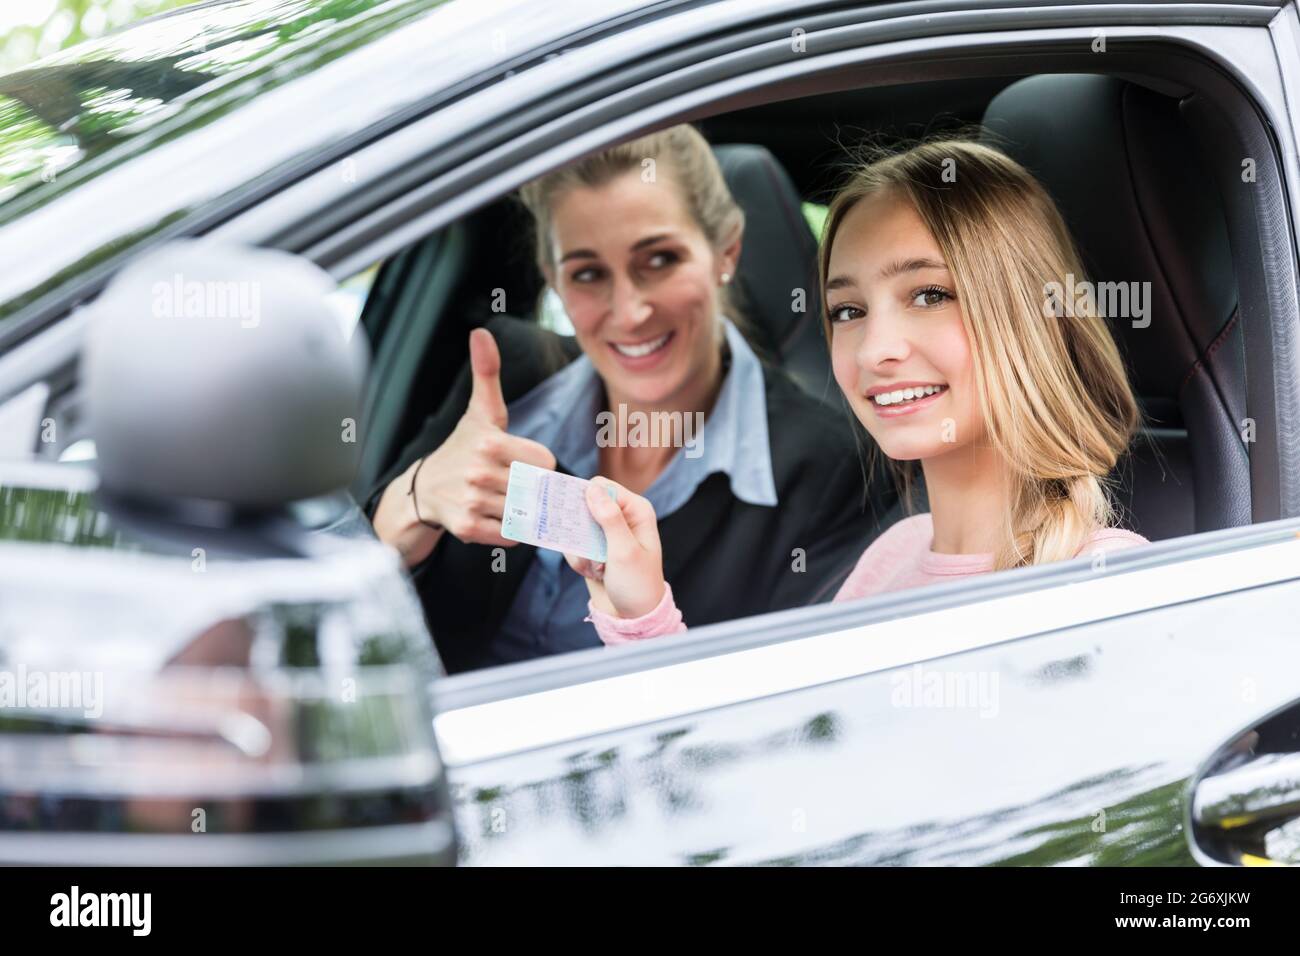 Proud driving student having passed the test showing her license Stock Photo